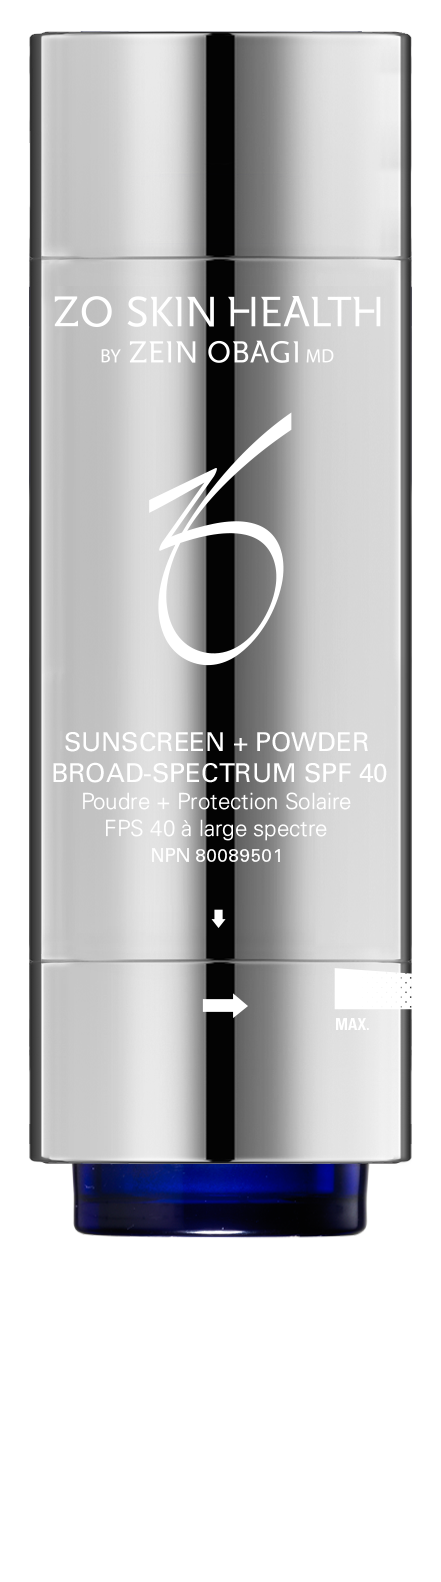 Poudre & Protection Solaire Large Spectre SPF 40 - teinte moyenne